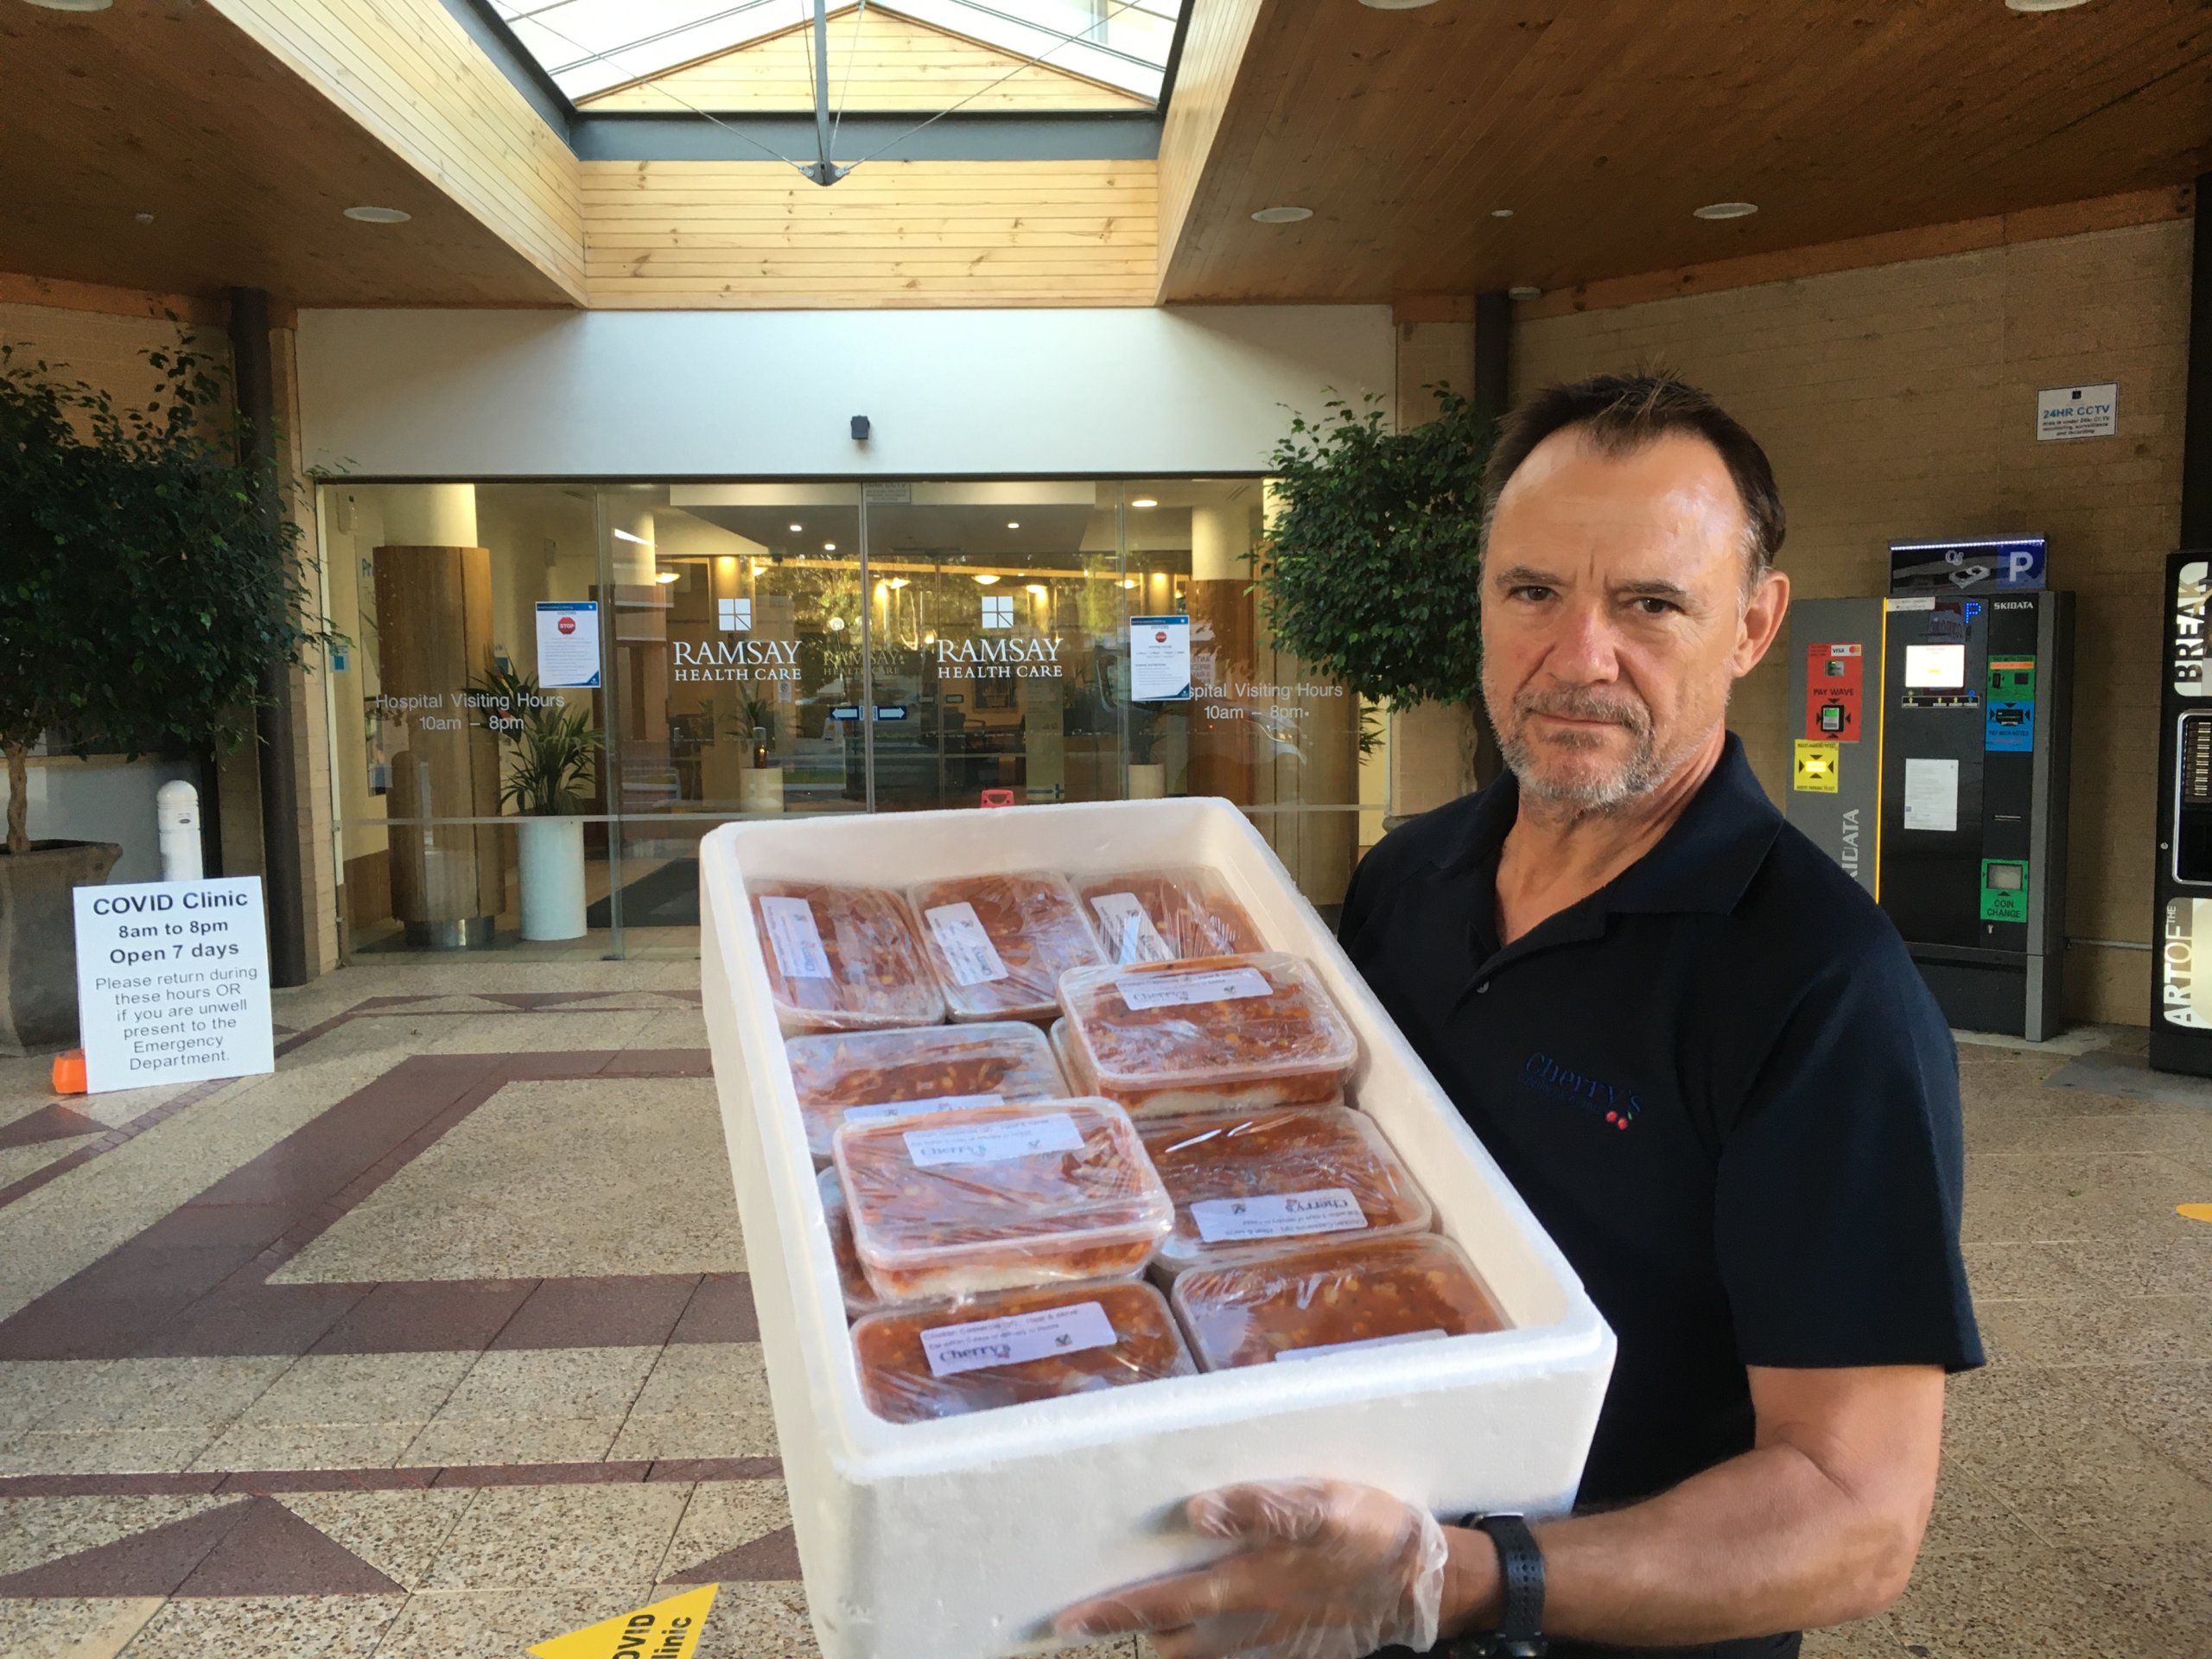 Craig with a box of complimentary frontline staff meals from Cherry's Catering for Joondalup Health Campus staff